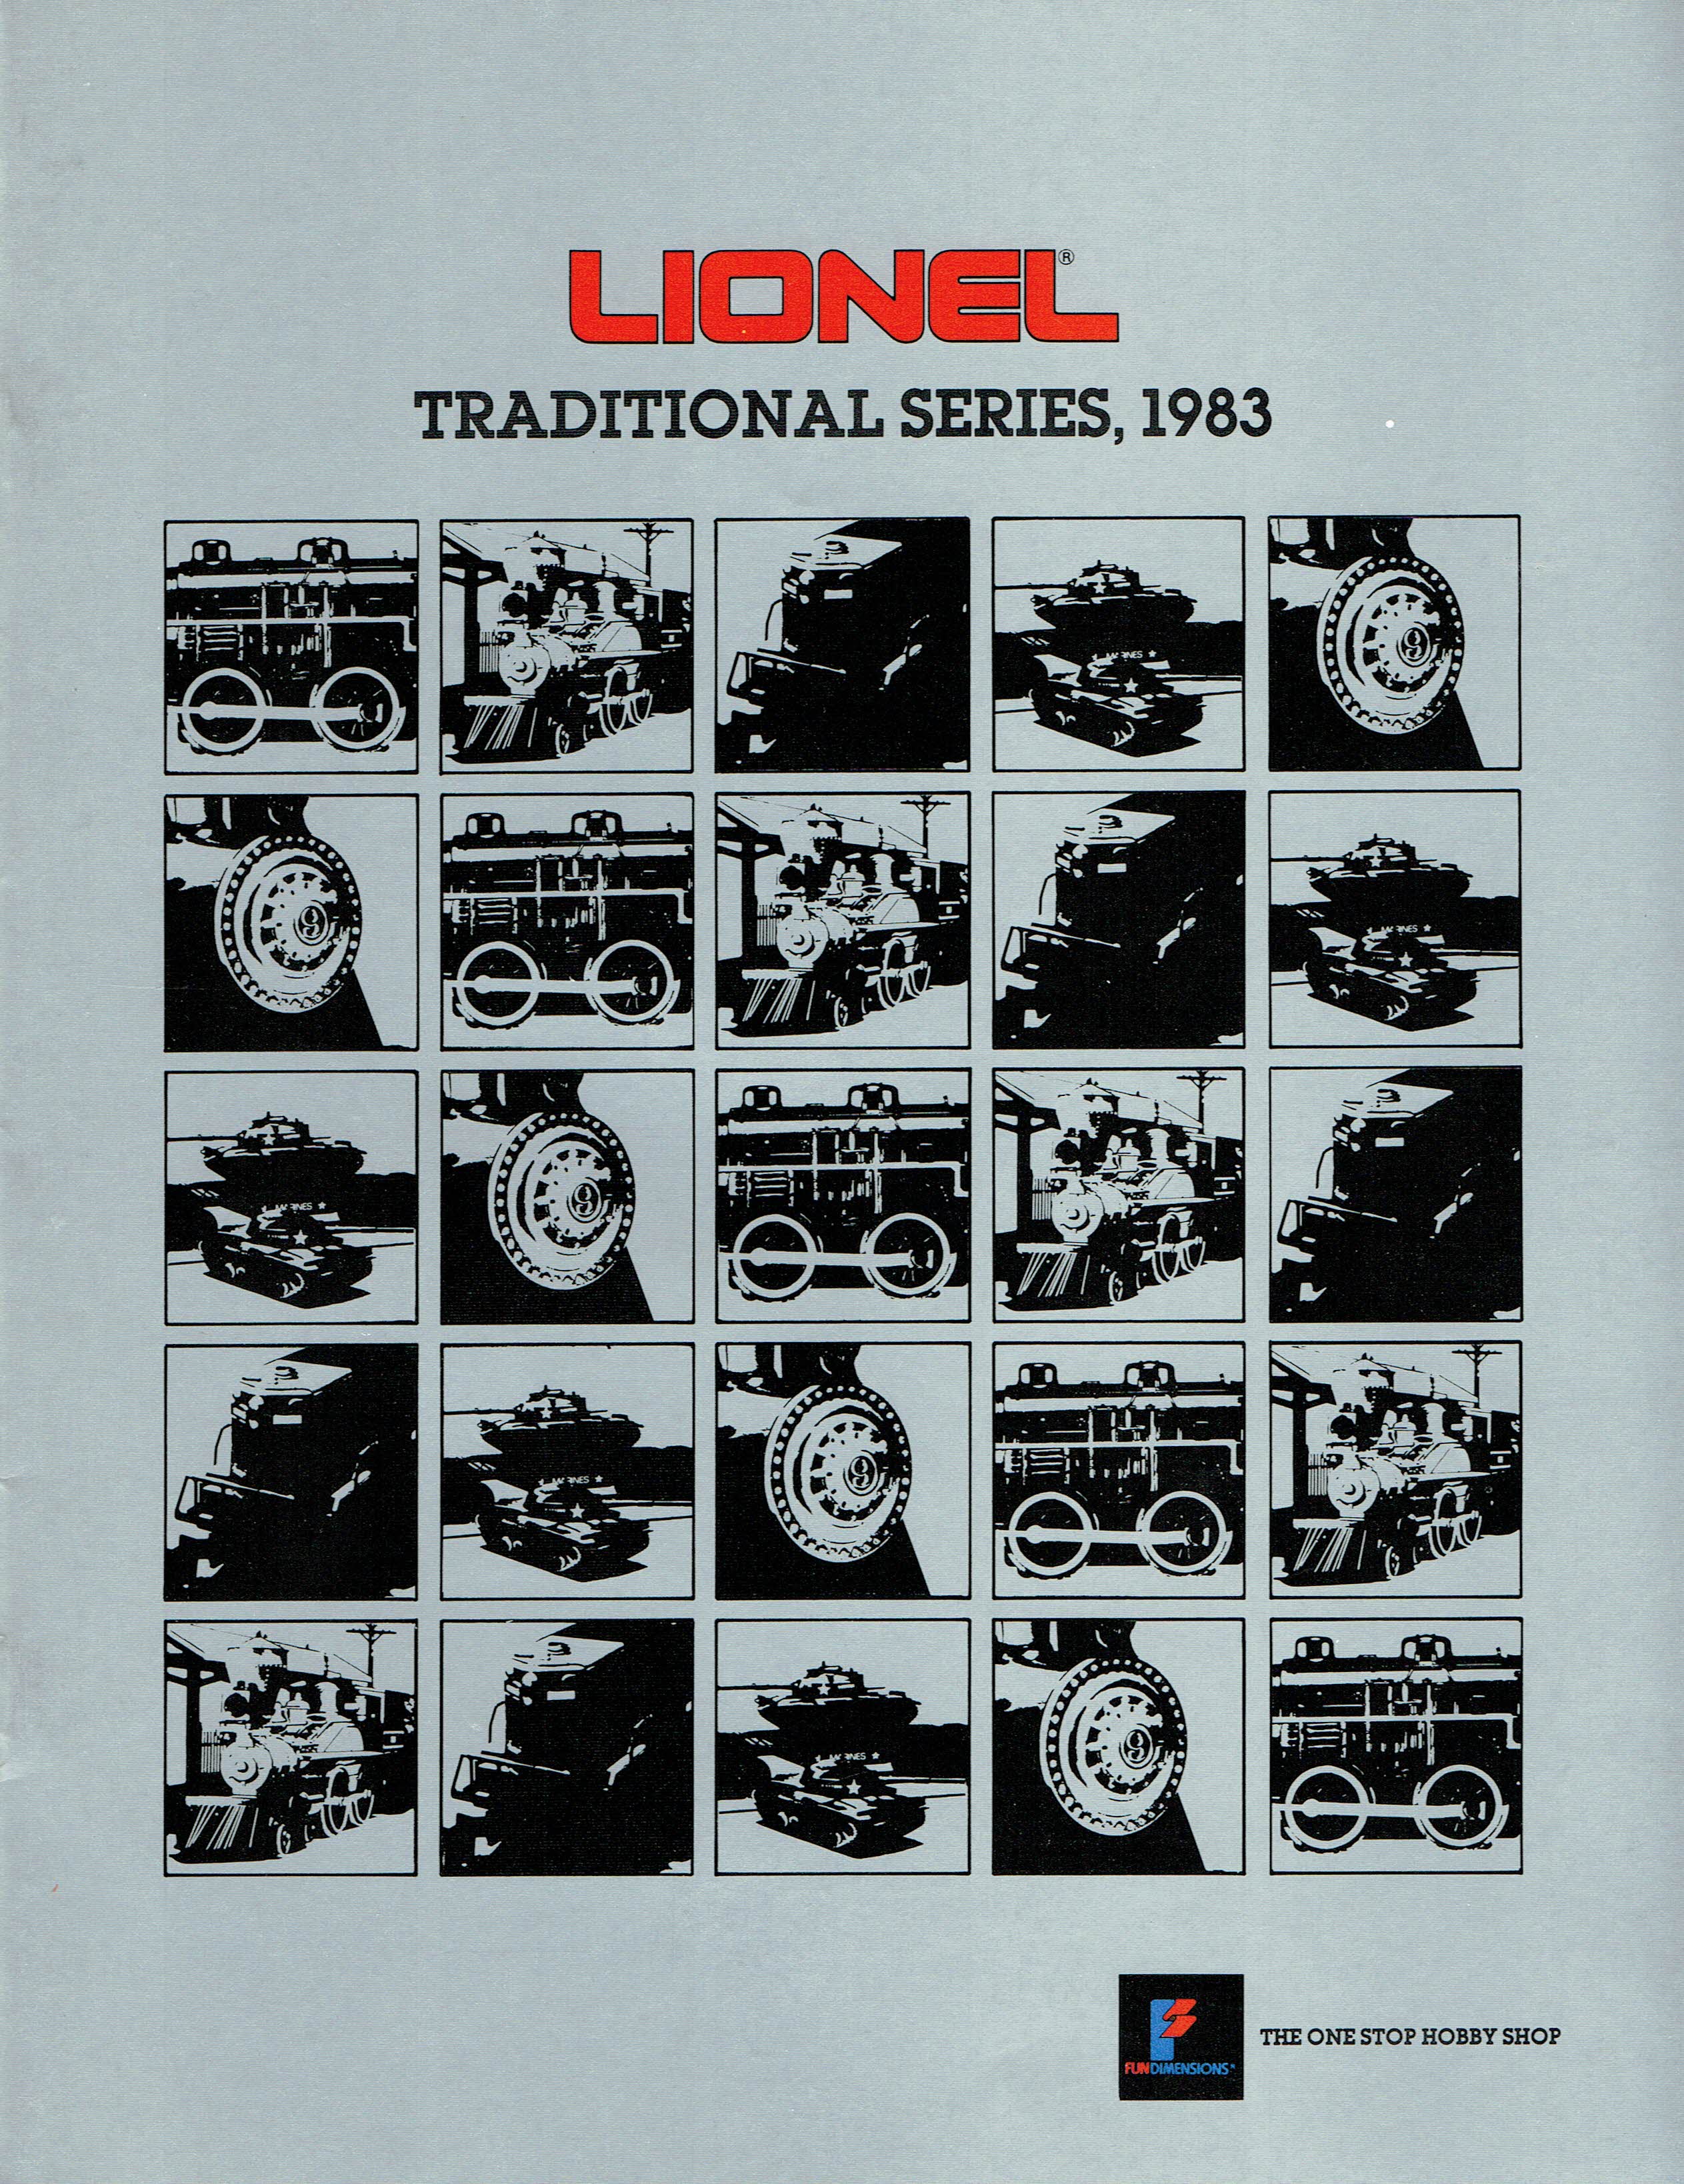 Lionel 1983 Traditional Series Catalog image